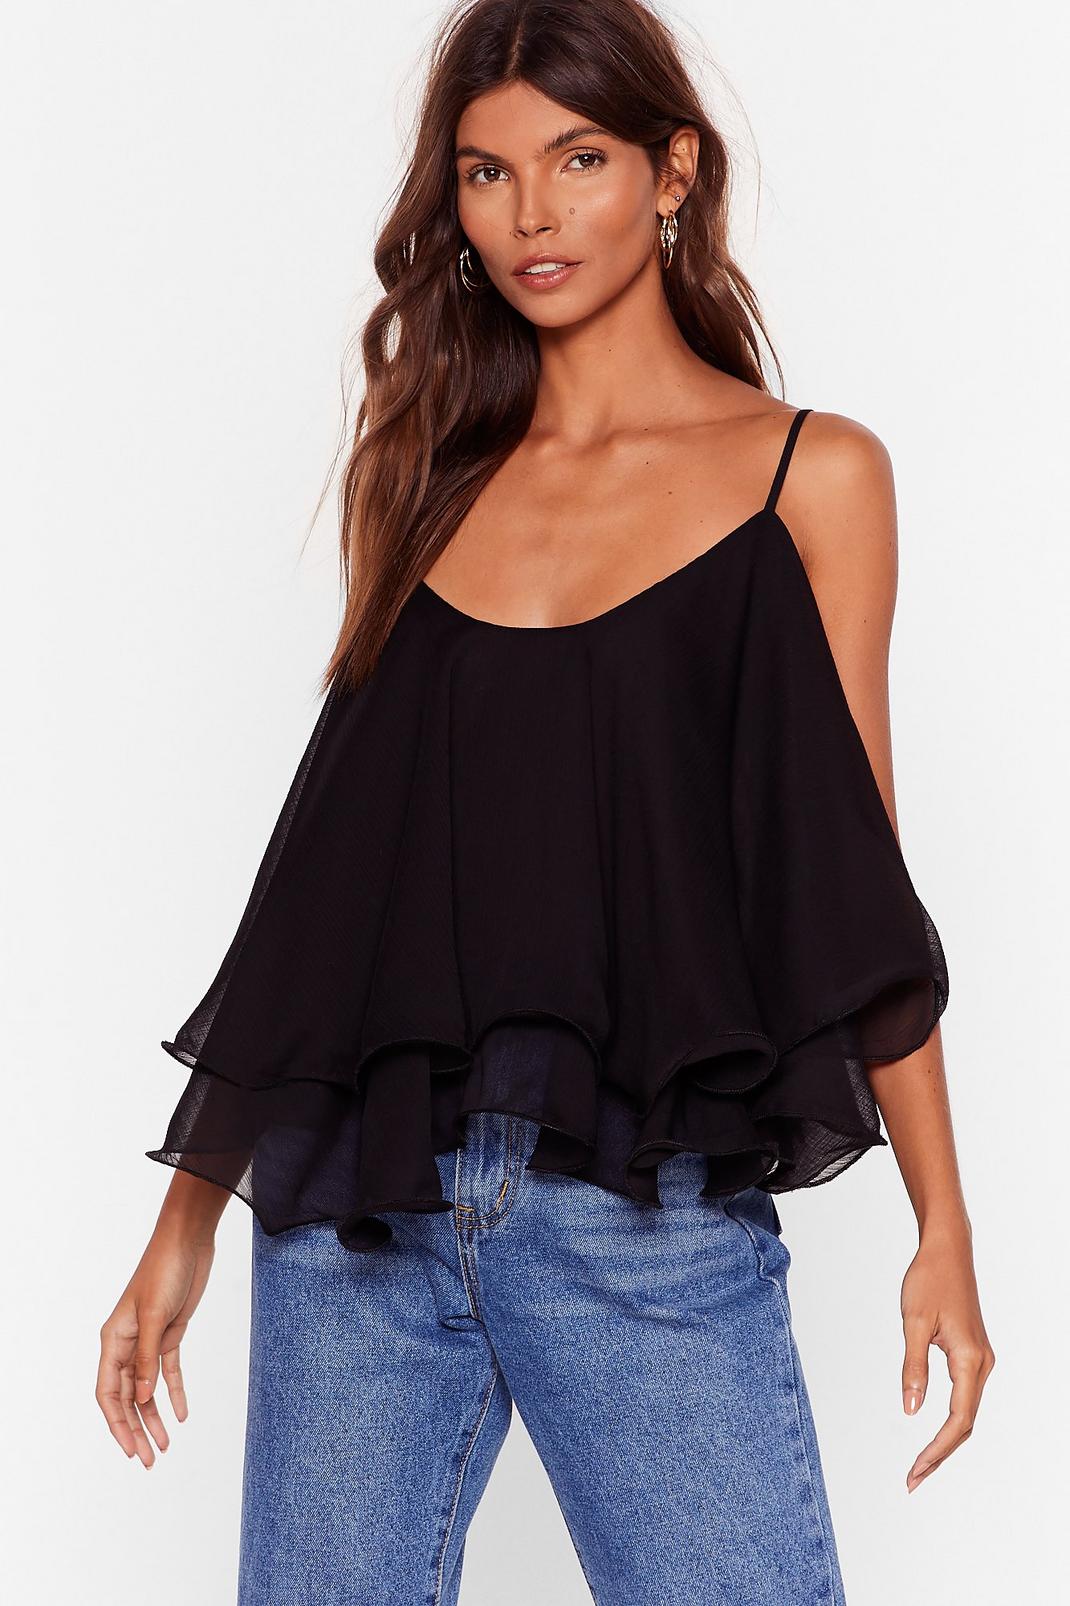 Swing into Action Ruffle Cami Top